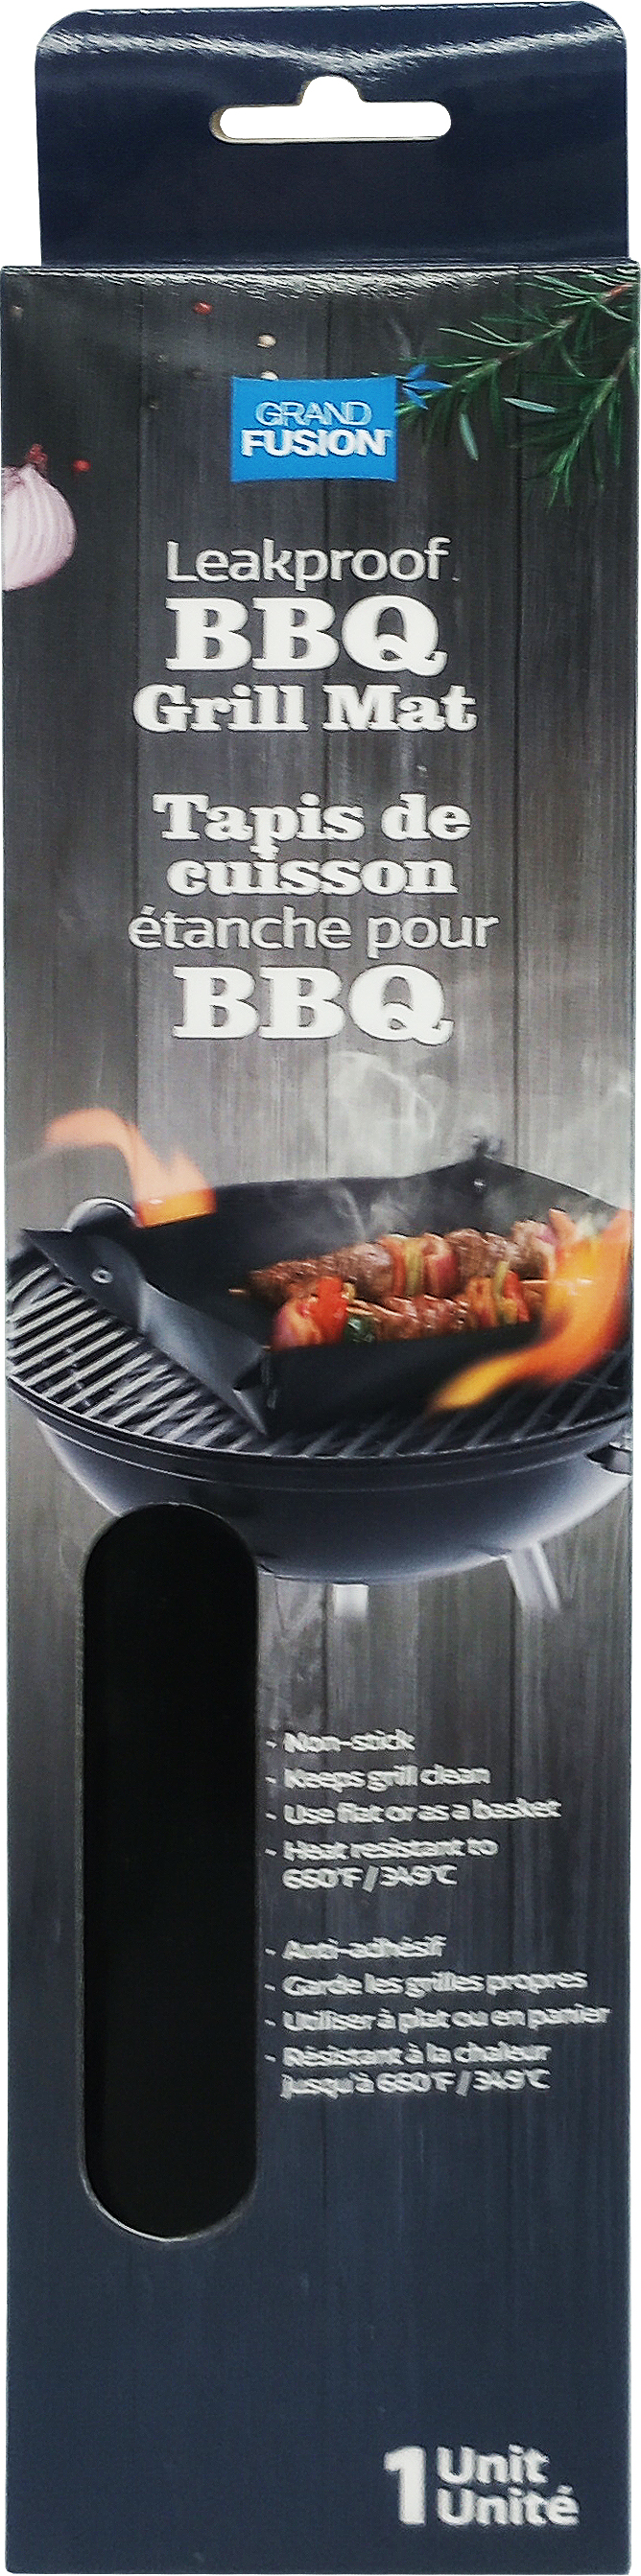 Image Leakproof Non-Stick BBQ Grill Mat - Black